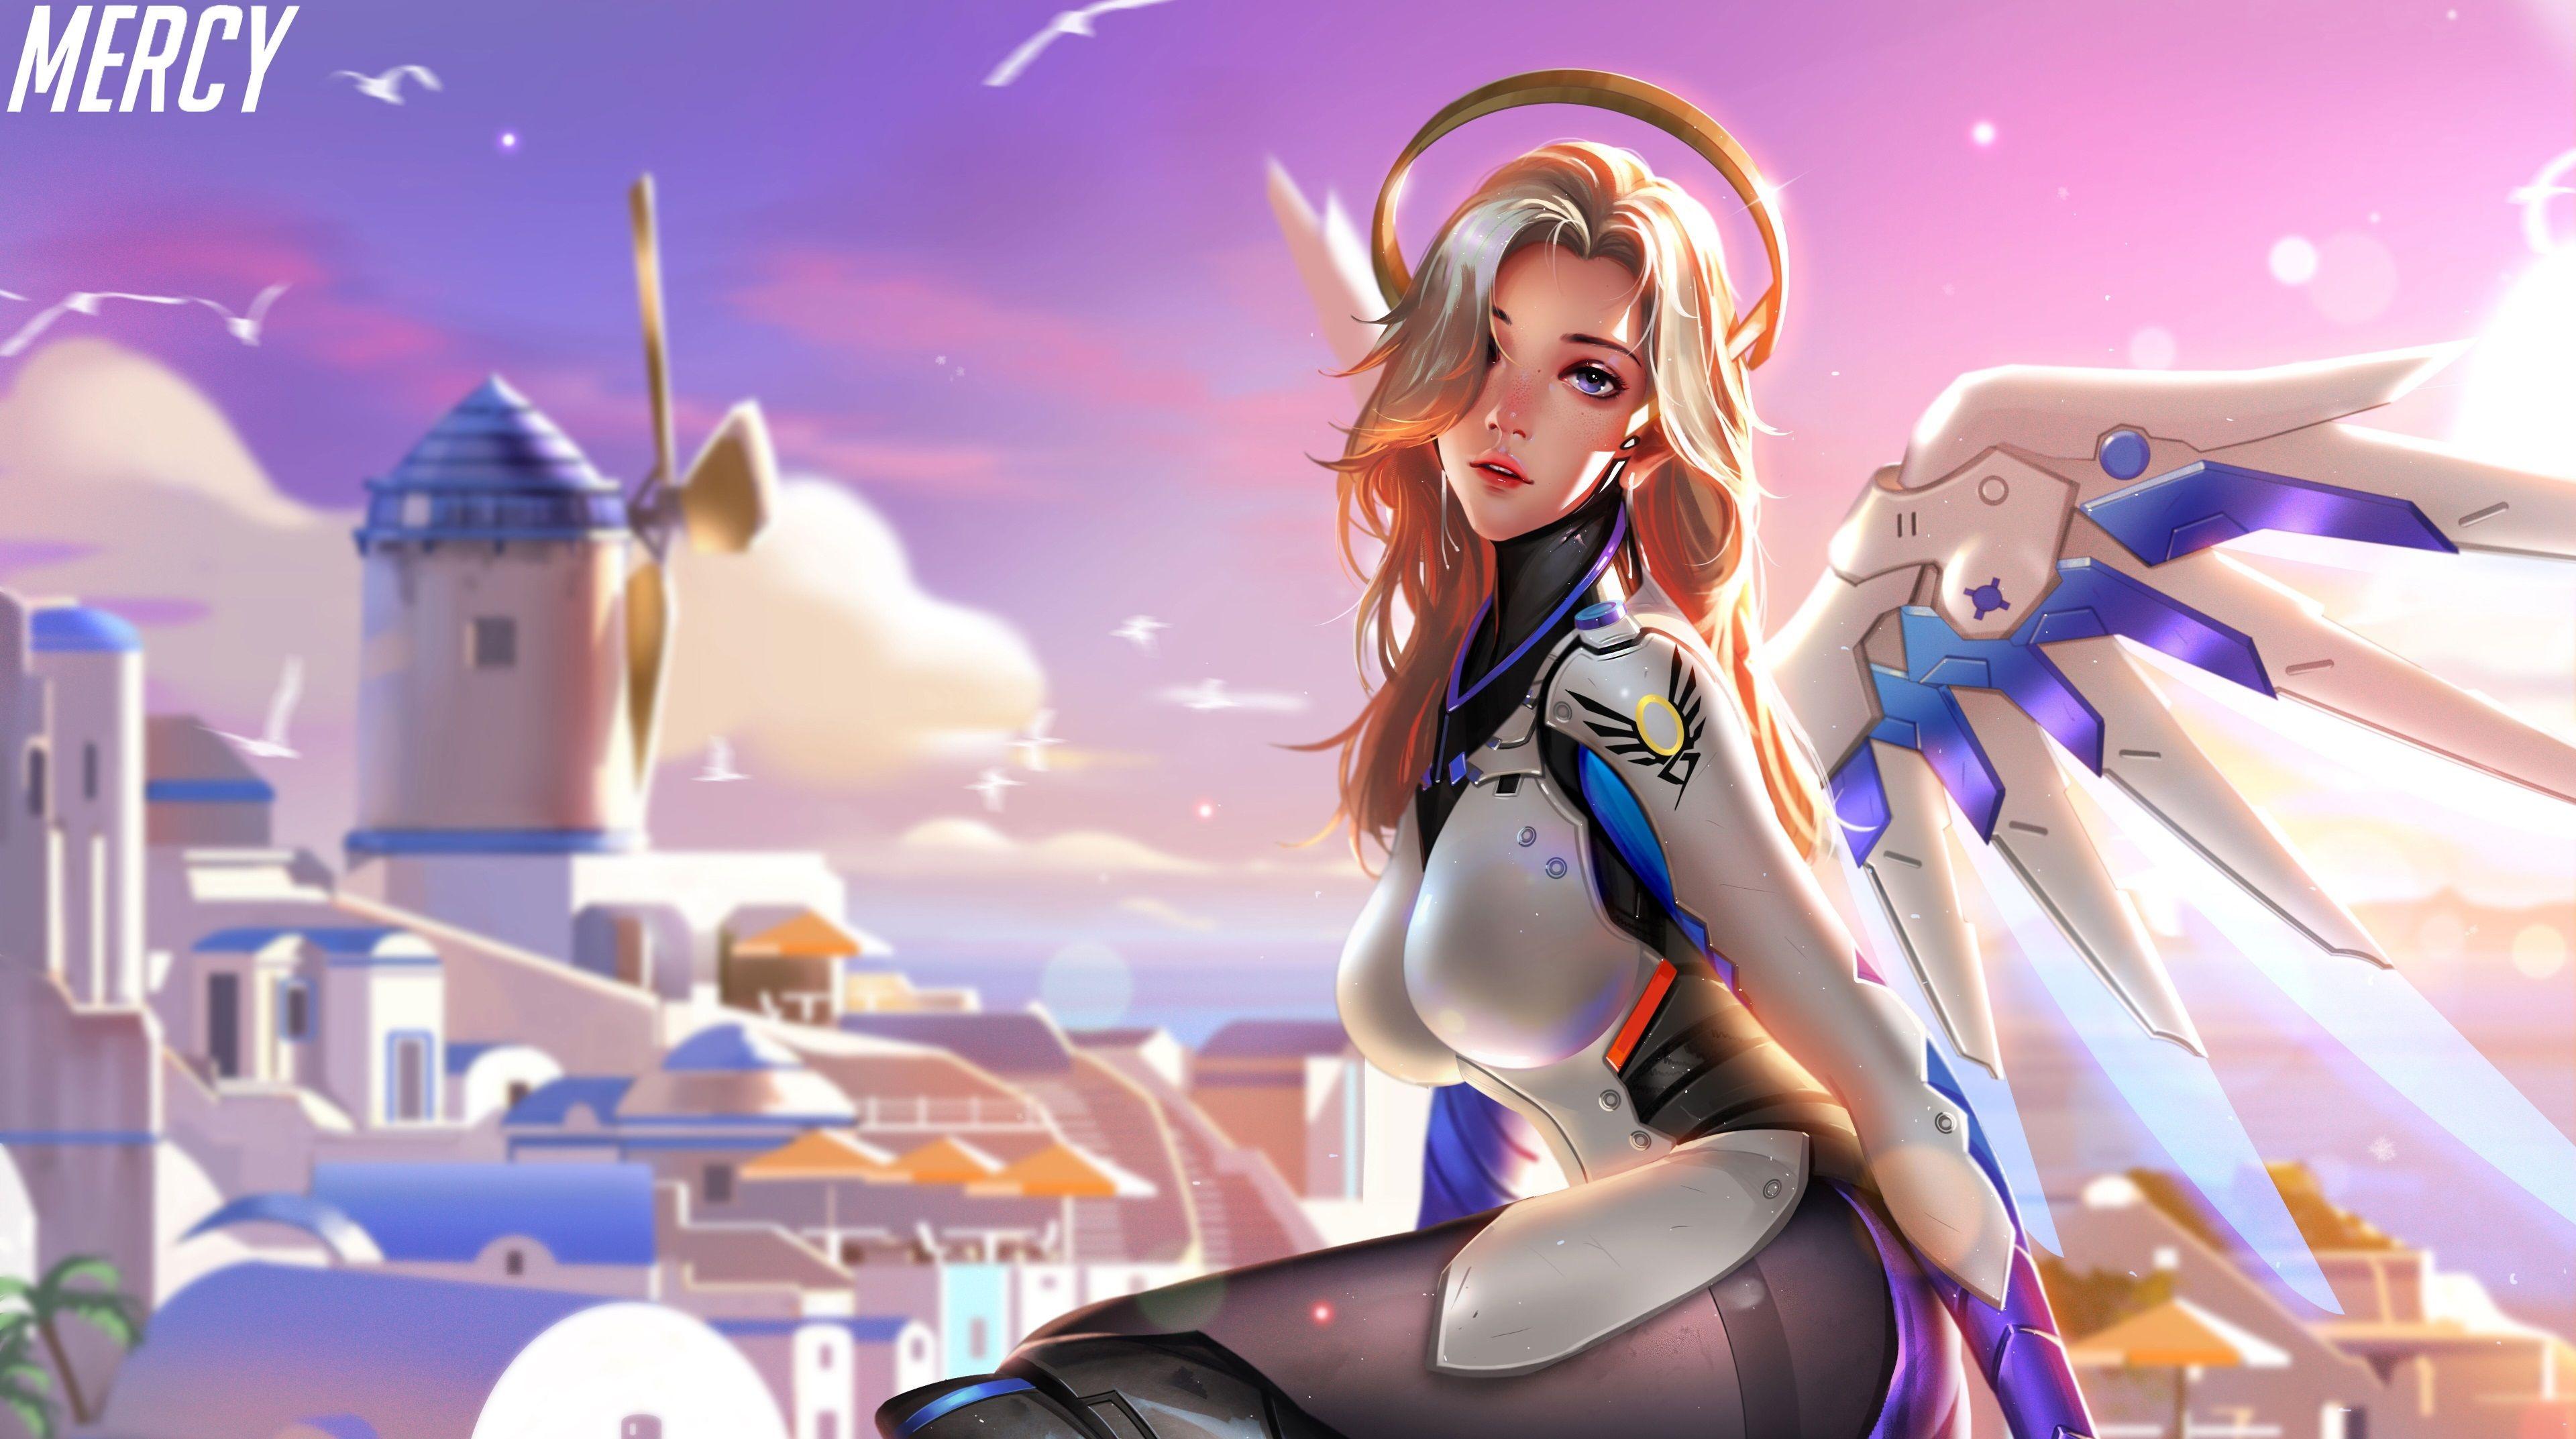 General 3840x2145 Overwatch Overwatch Anniversary Overwatch League blue eyes blonde halo angel Mercy (Overwatch) video game art Jason Liang video games video game characters Blizzard Entertainment Swiss women